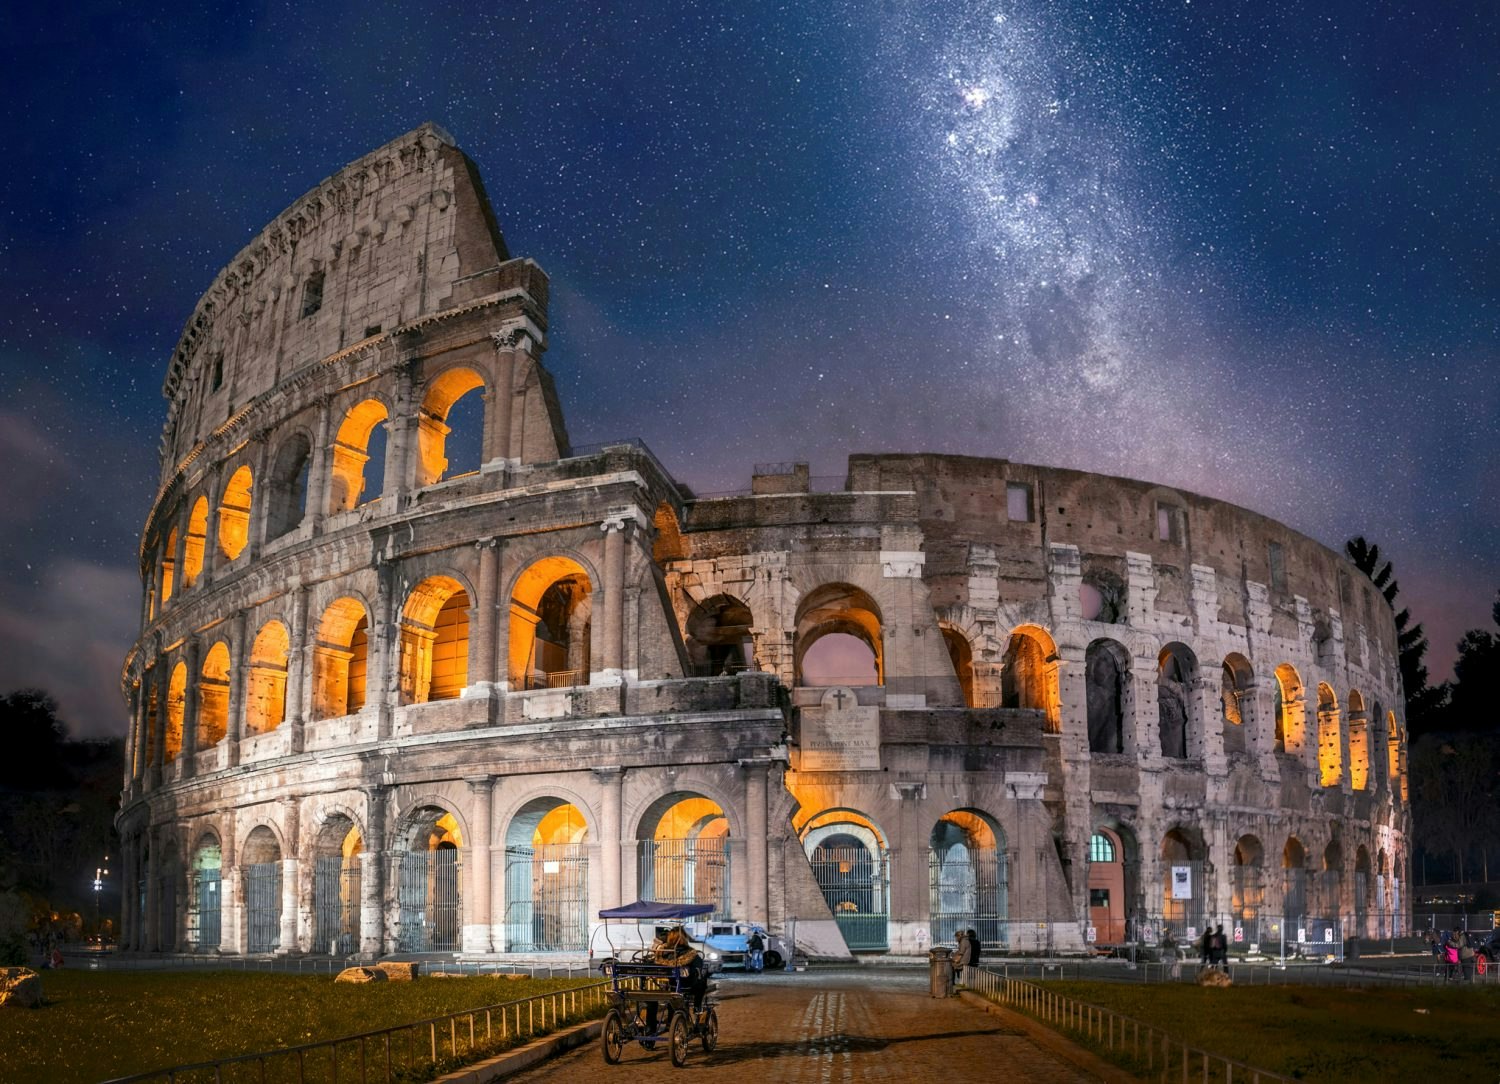 The Colosseum in Rome at night.